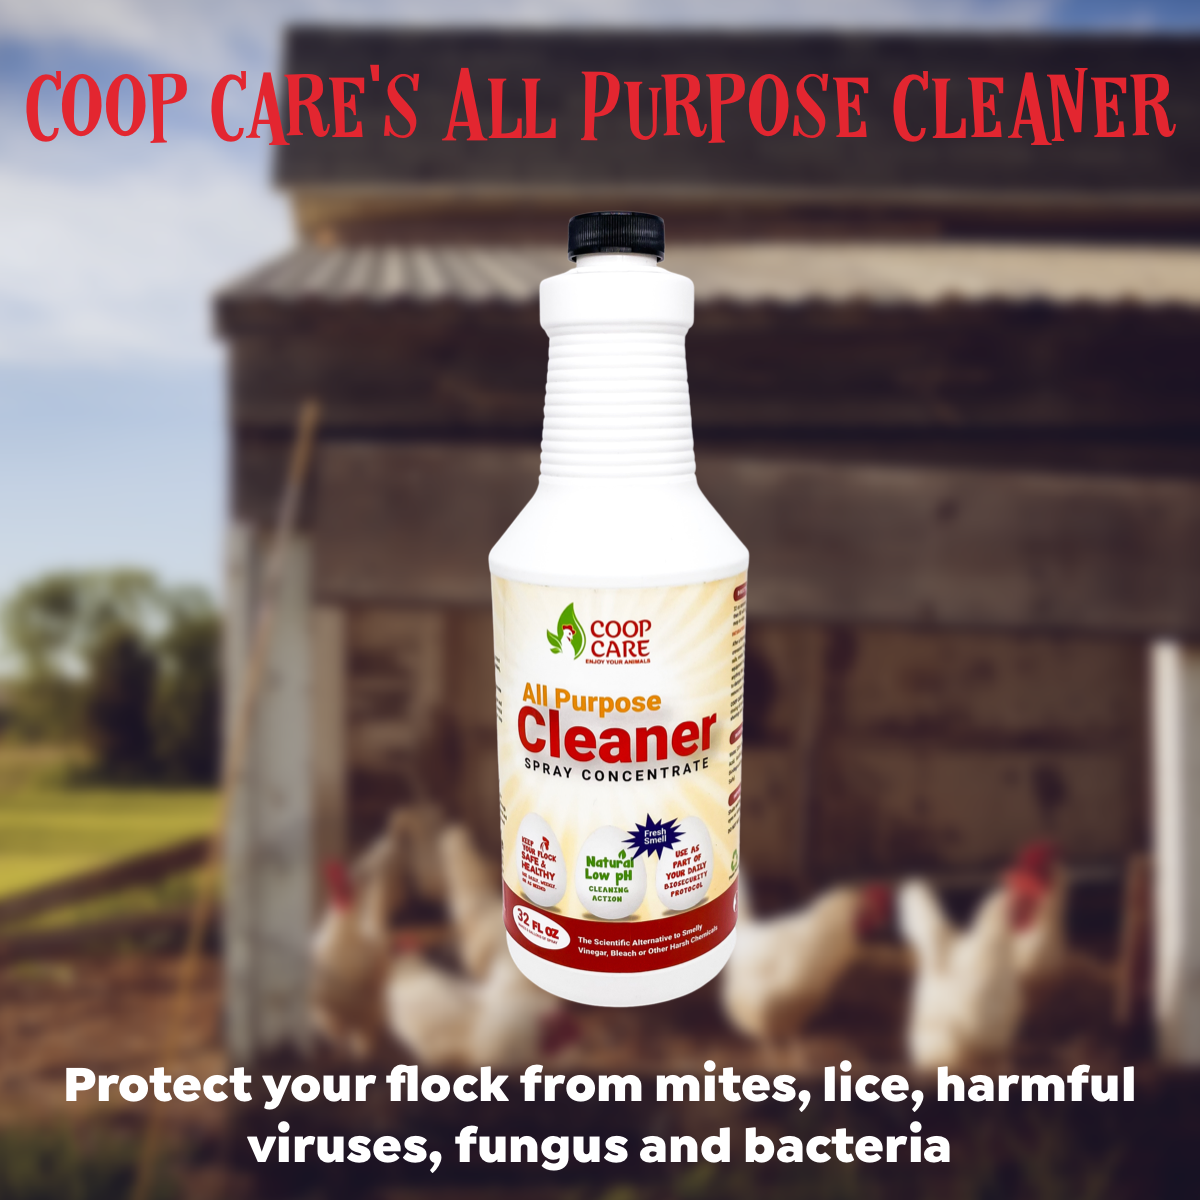 Coop Care All Purpose Cleaner 32oz Spray Concentrate - FREE Shipping!